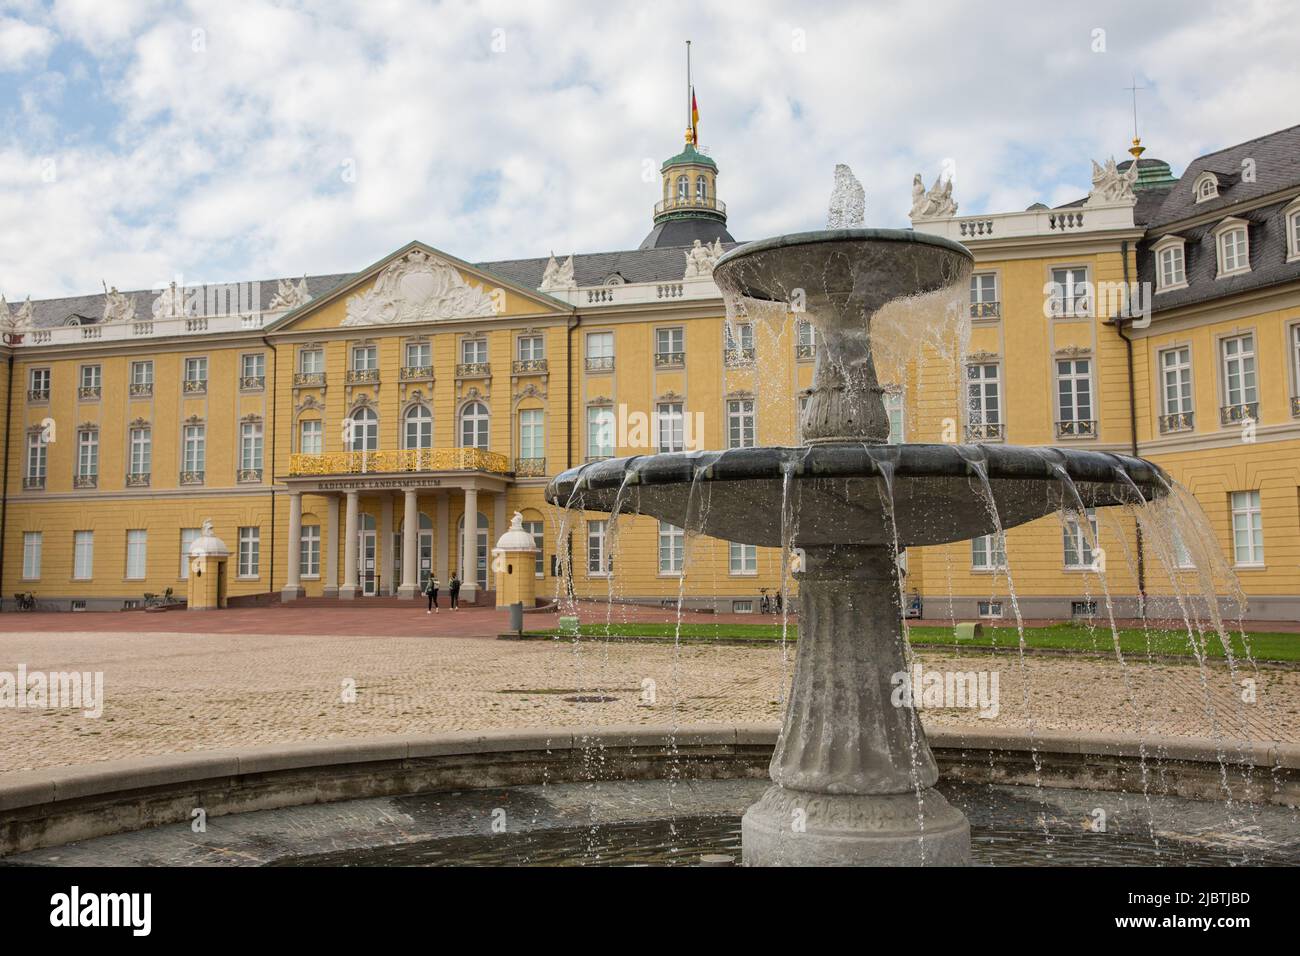 Karlsruhe, Germany - Aug 28, 2021: Fountain in front of Karlsruhe Palace. Stock Photo